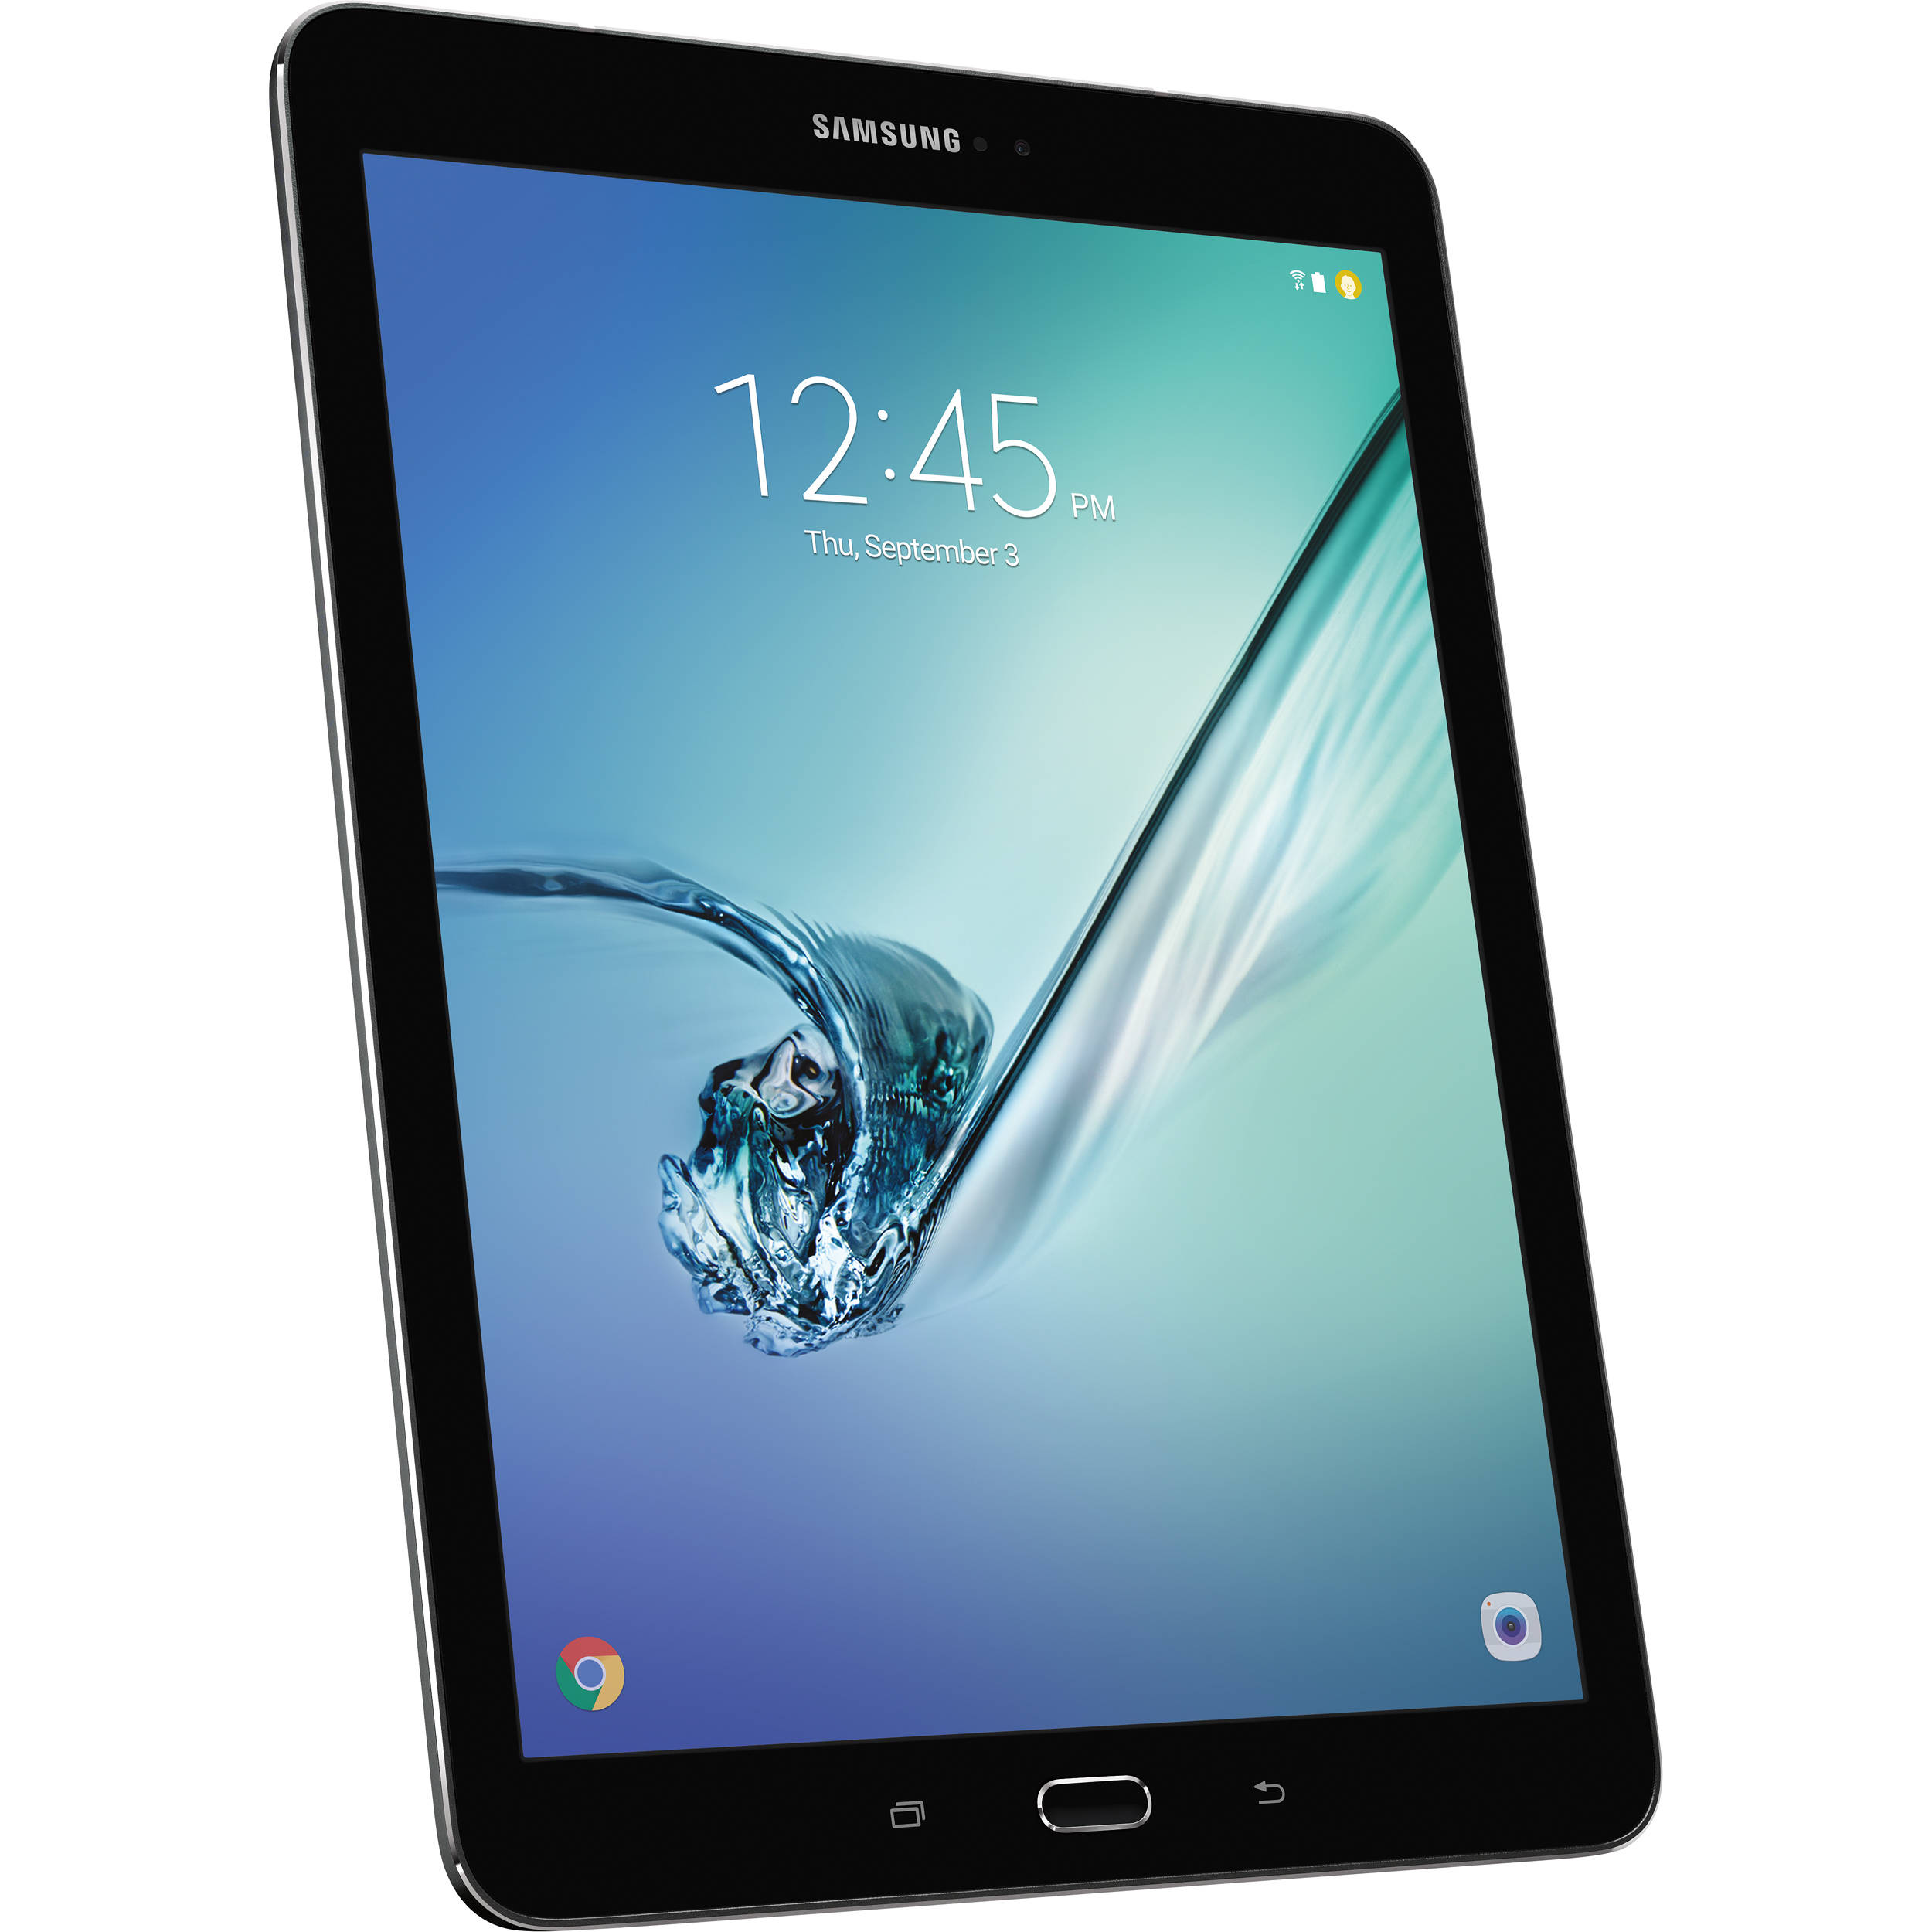 And the first January 2018 security update goes to Samsung Galaxy Tab A (2016)